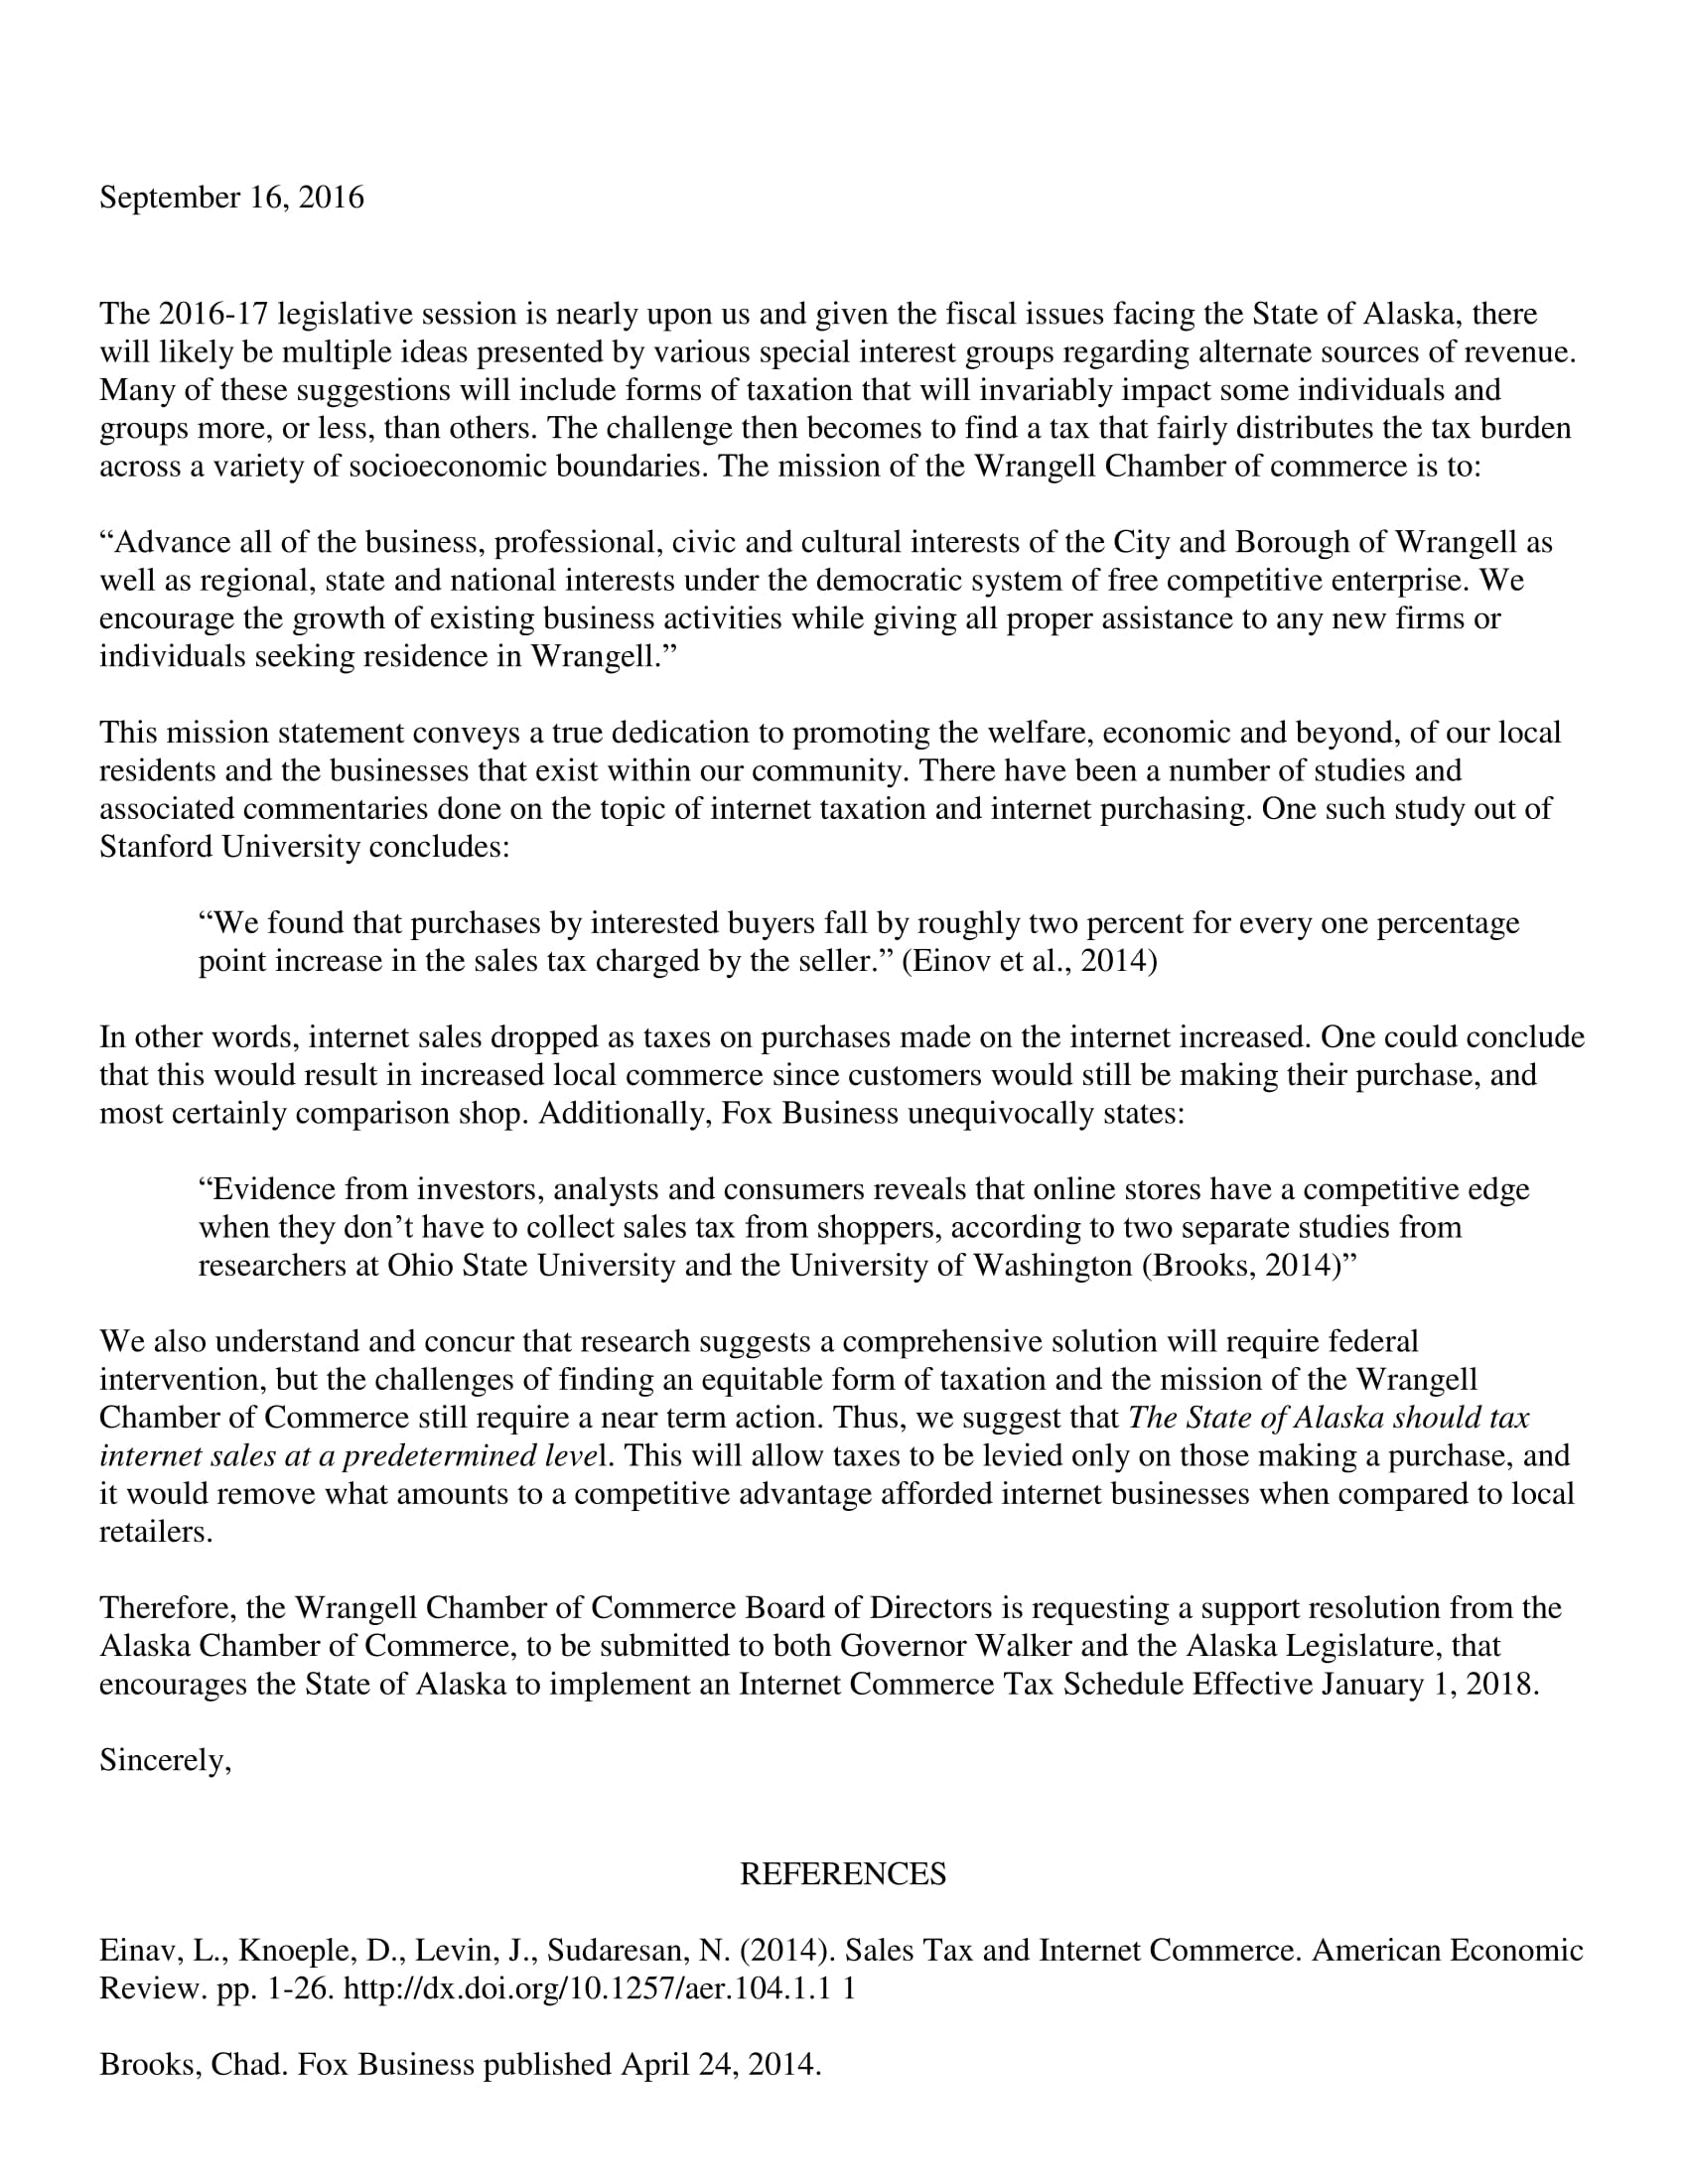 Wrangell Chamber of Commerce’s letter to the Wrangell Assembly, Southeast Conference and the Alaska Chamber of Commerce.